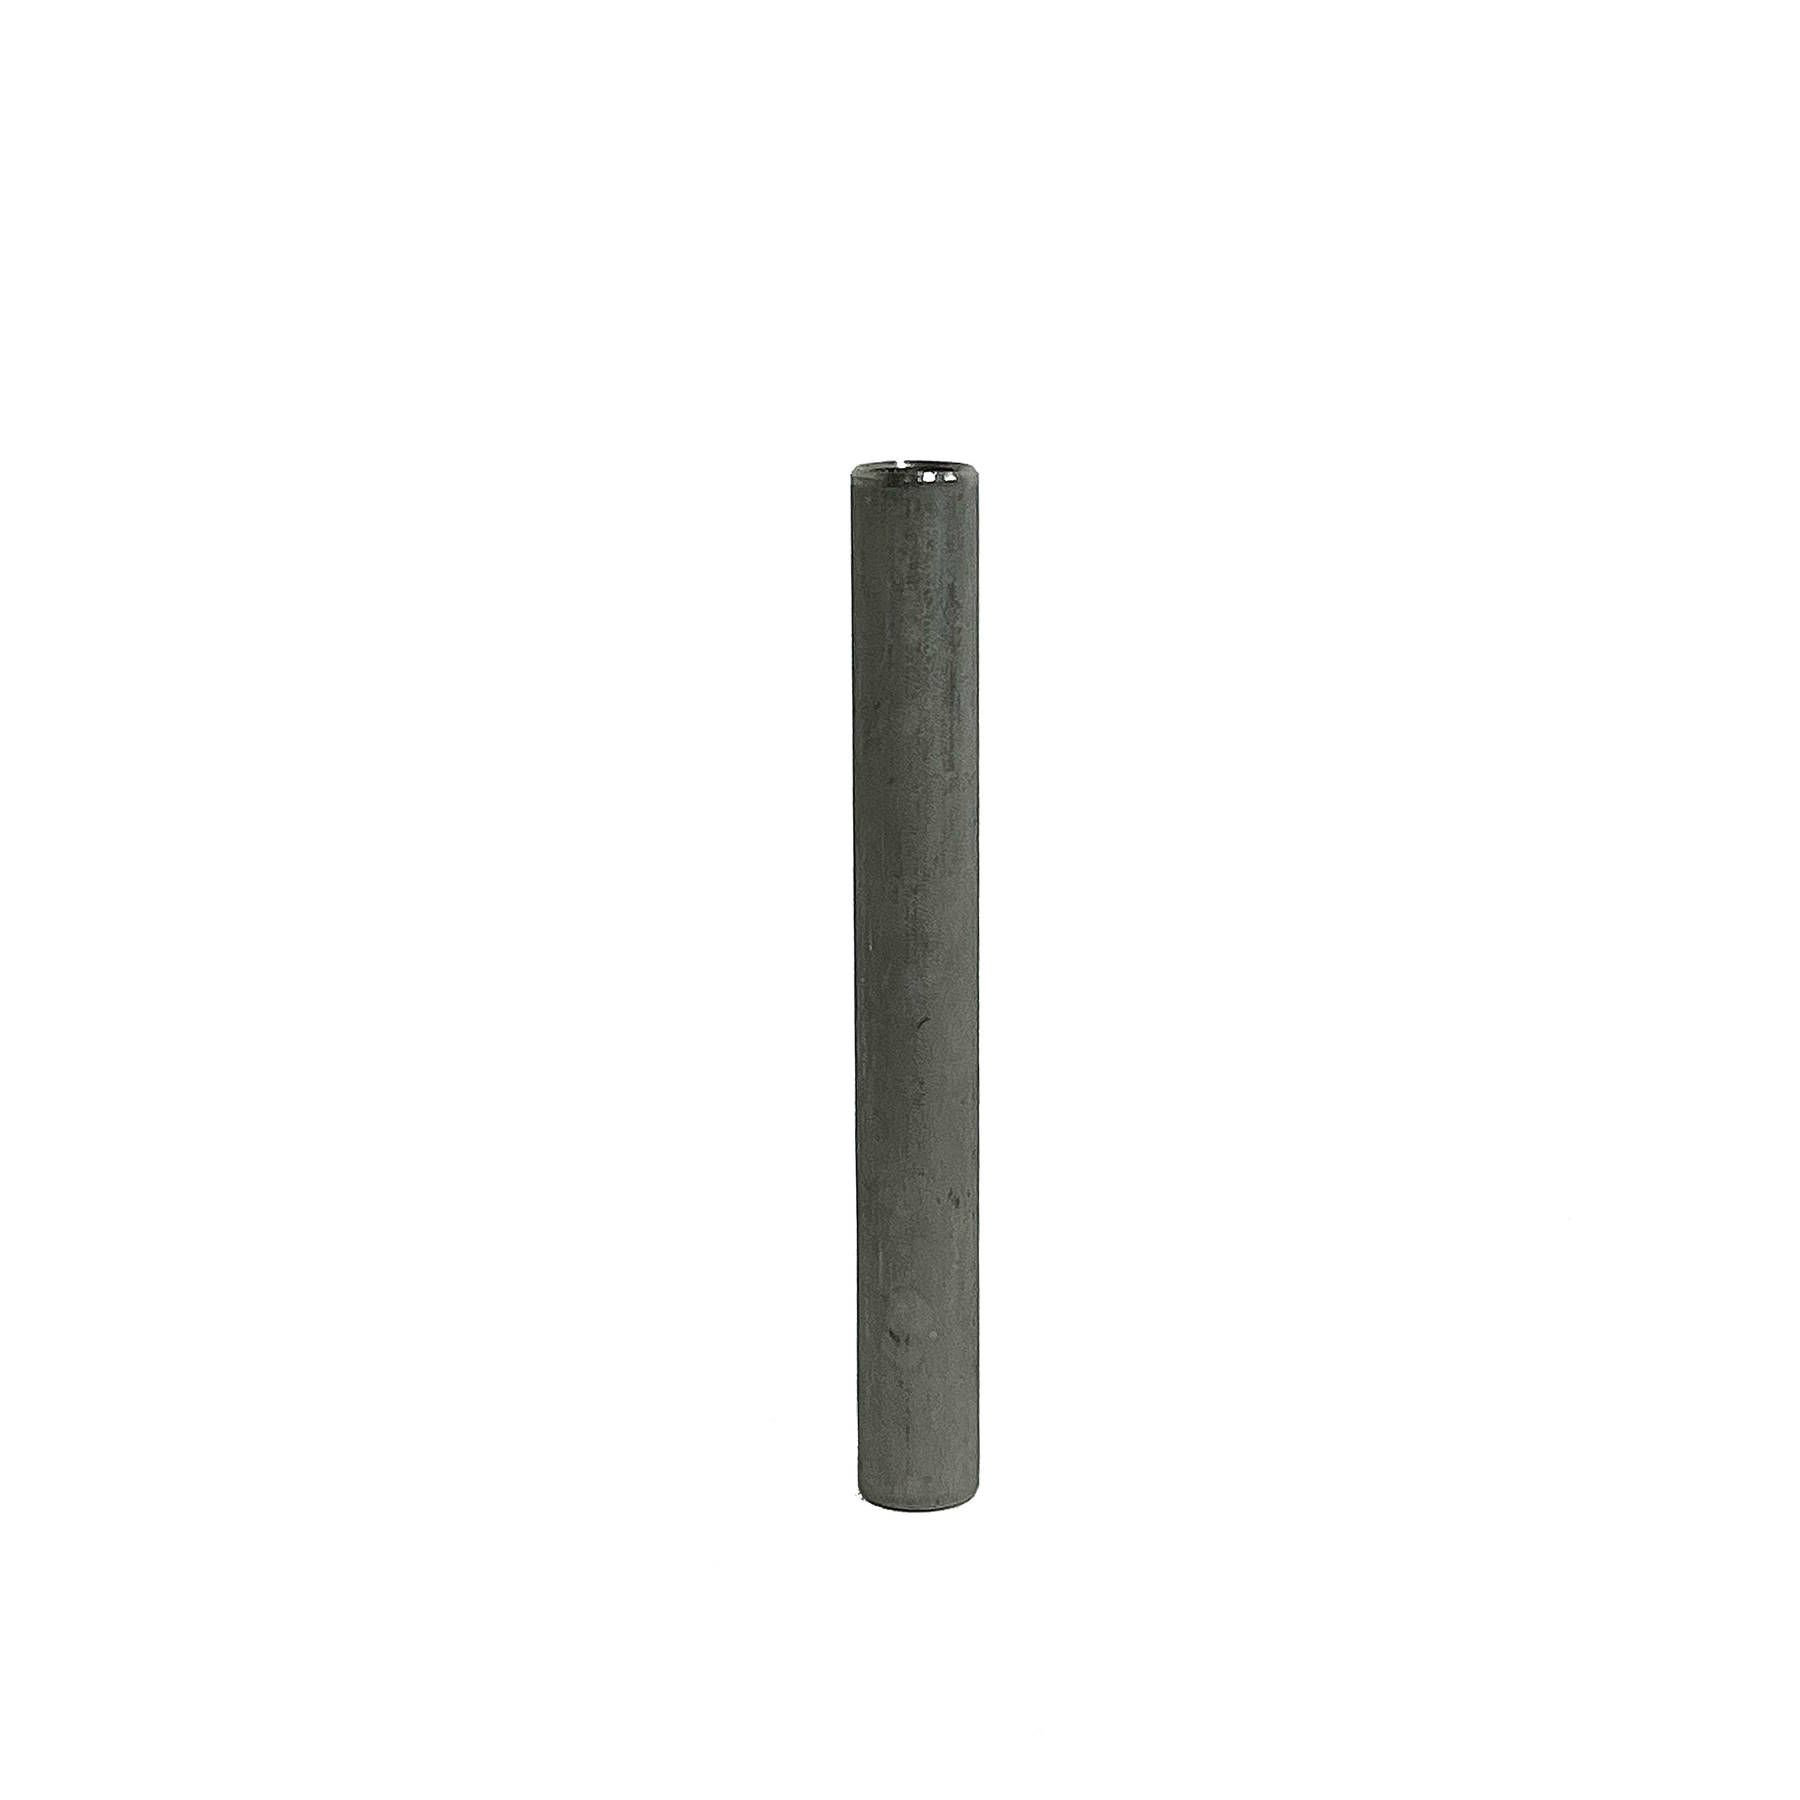 Wall Station Sleeve Stainless Steel - 80mm